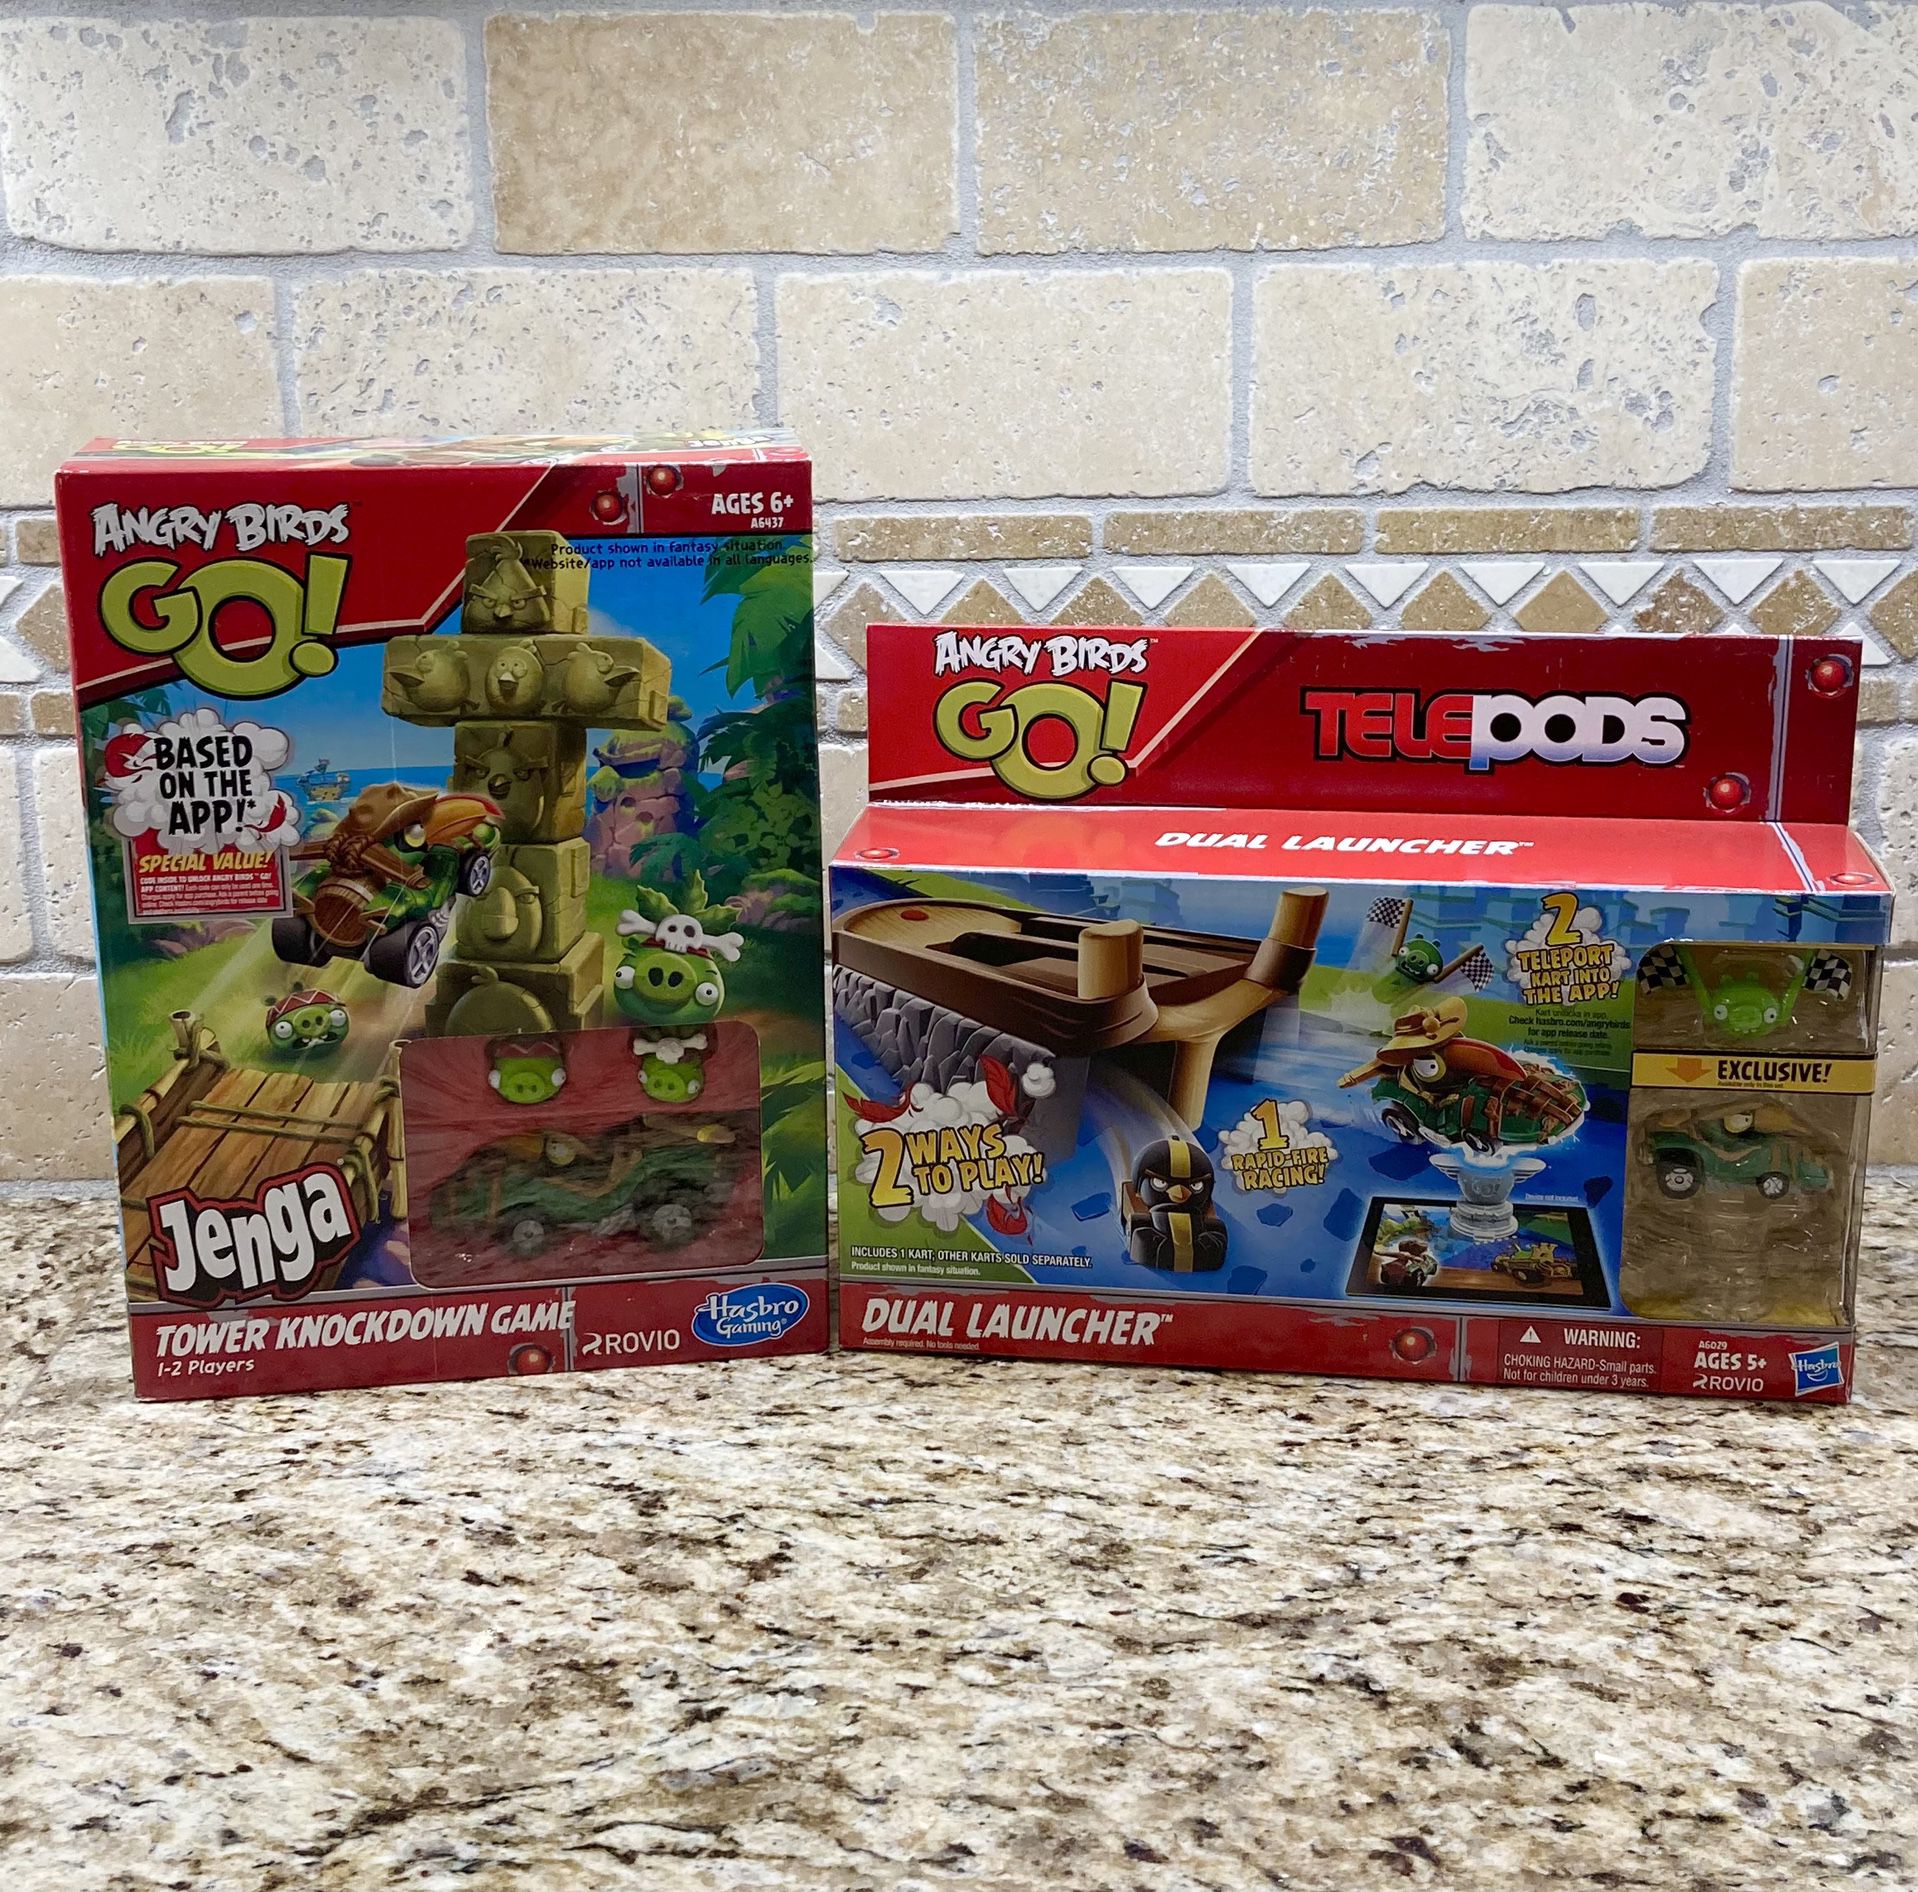 Angry Birds Go! Games - new in box